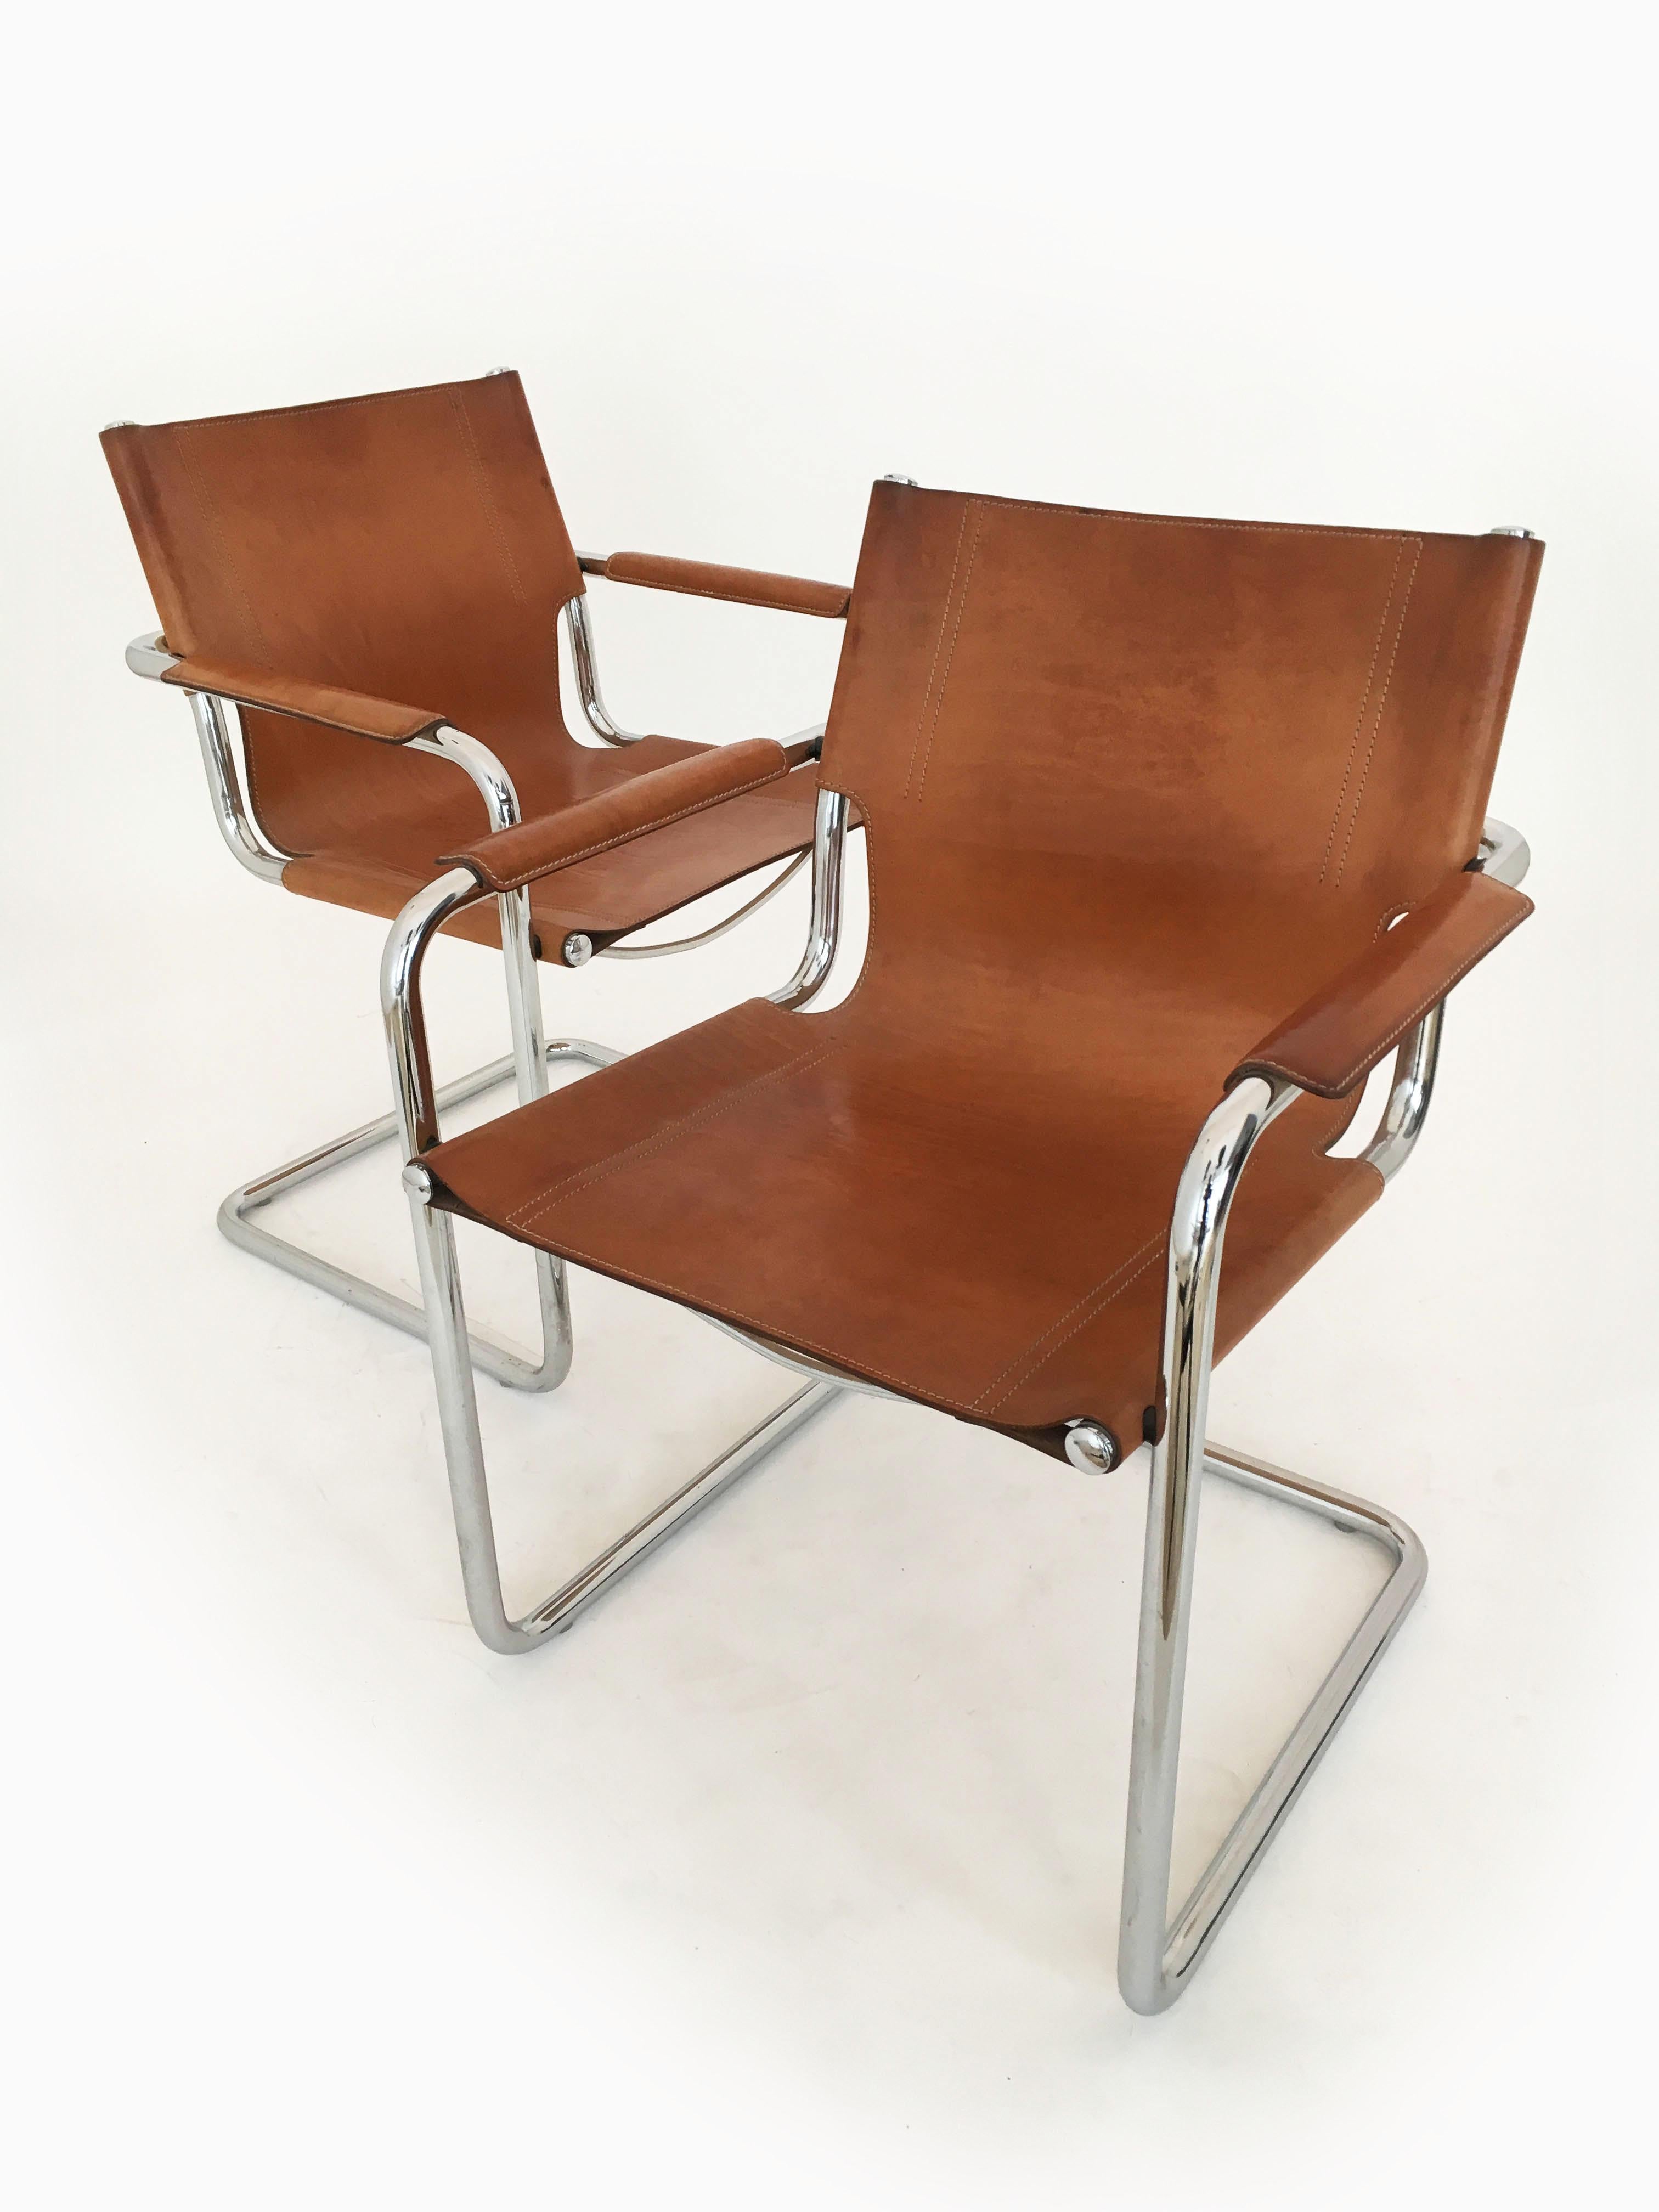 Matteo Grassi Cantilever Visitor Side Chairs Pair, Italy, 1970s For Sale 1